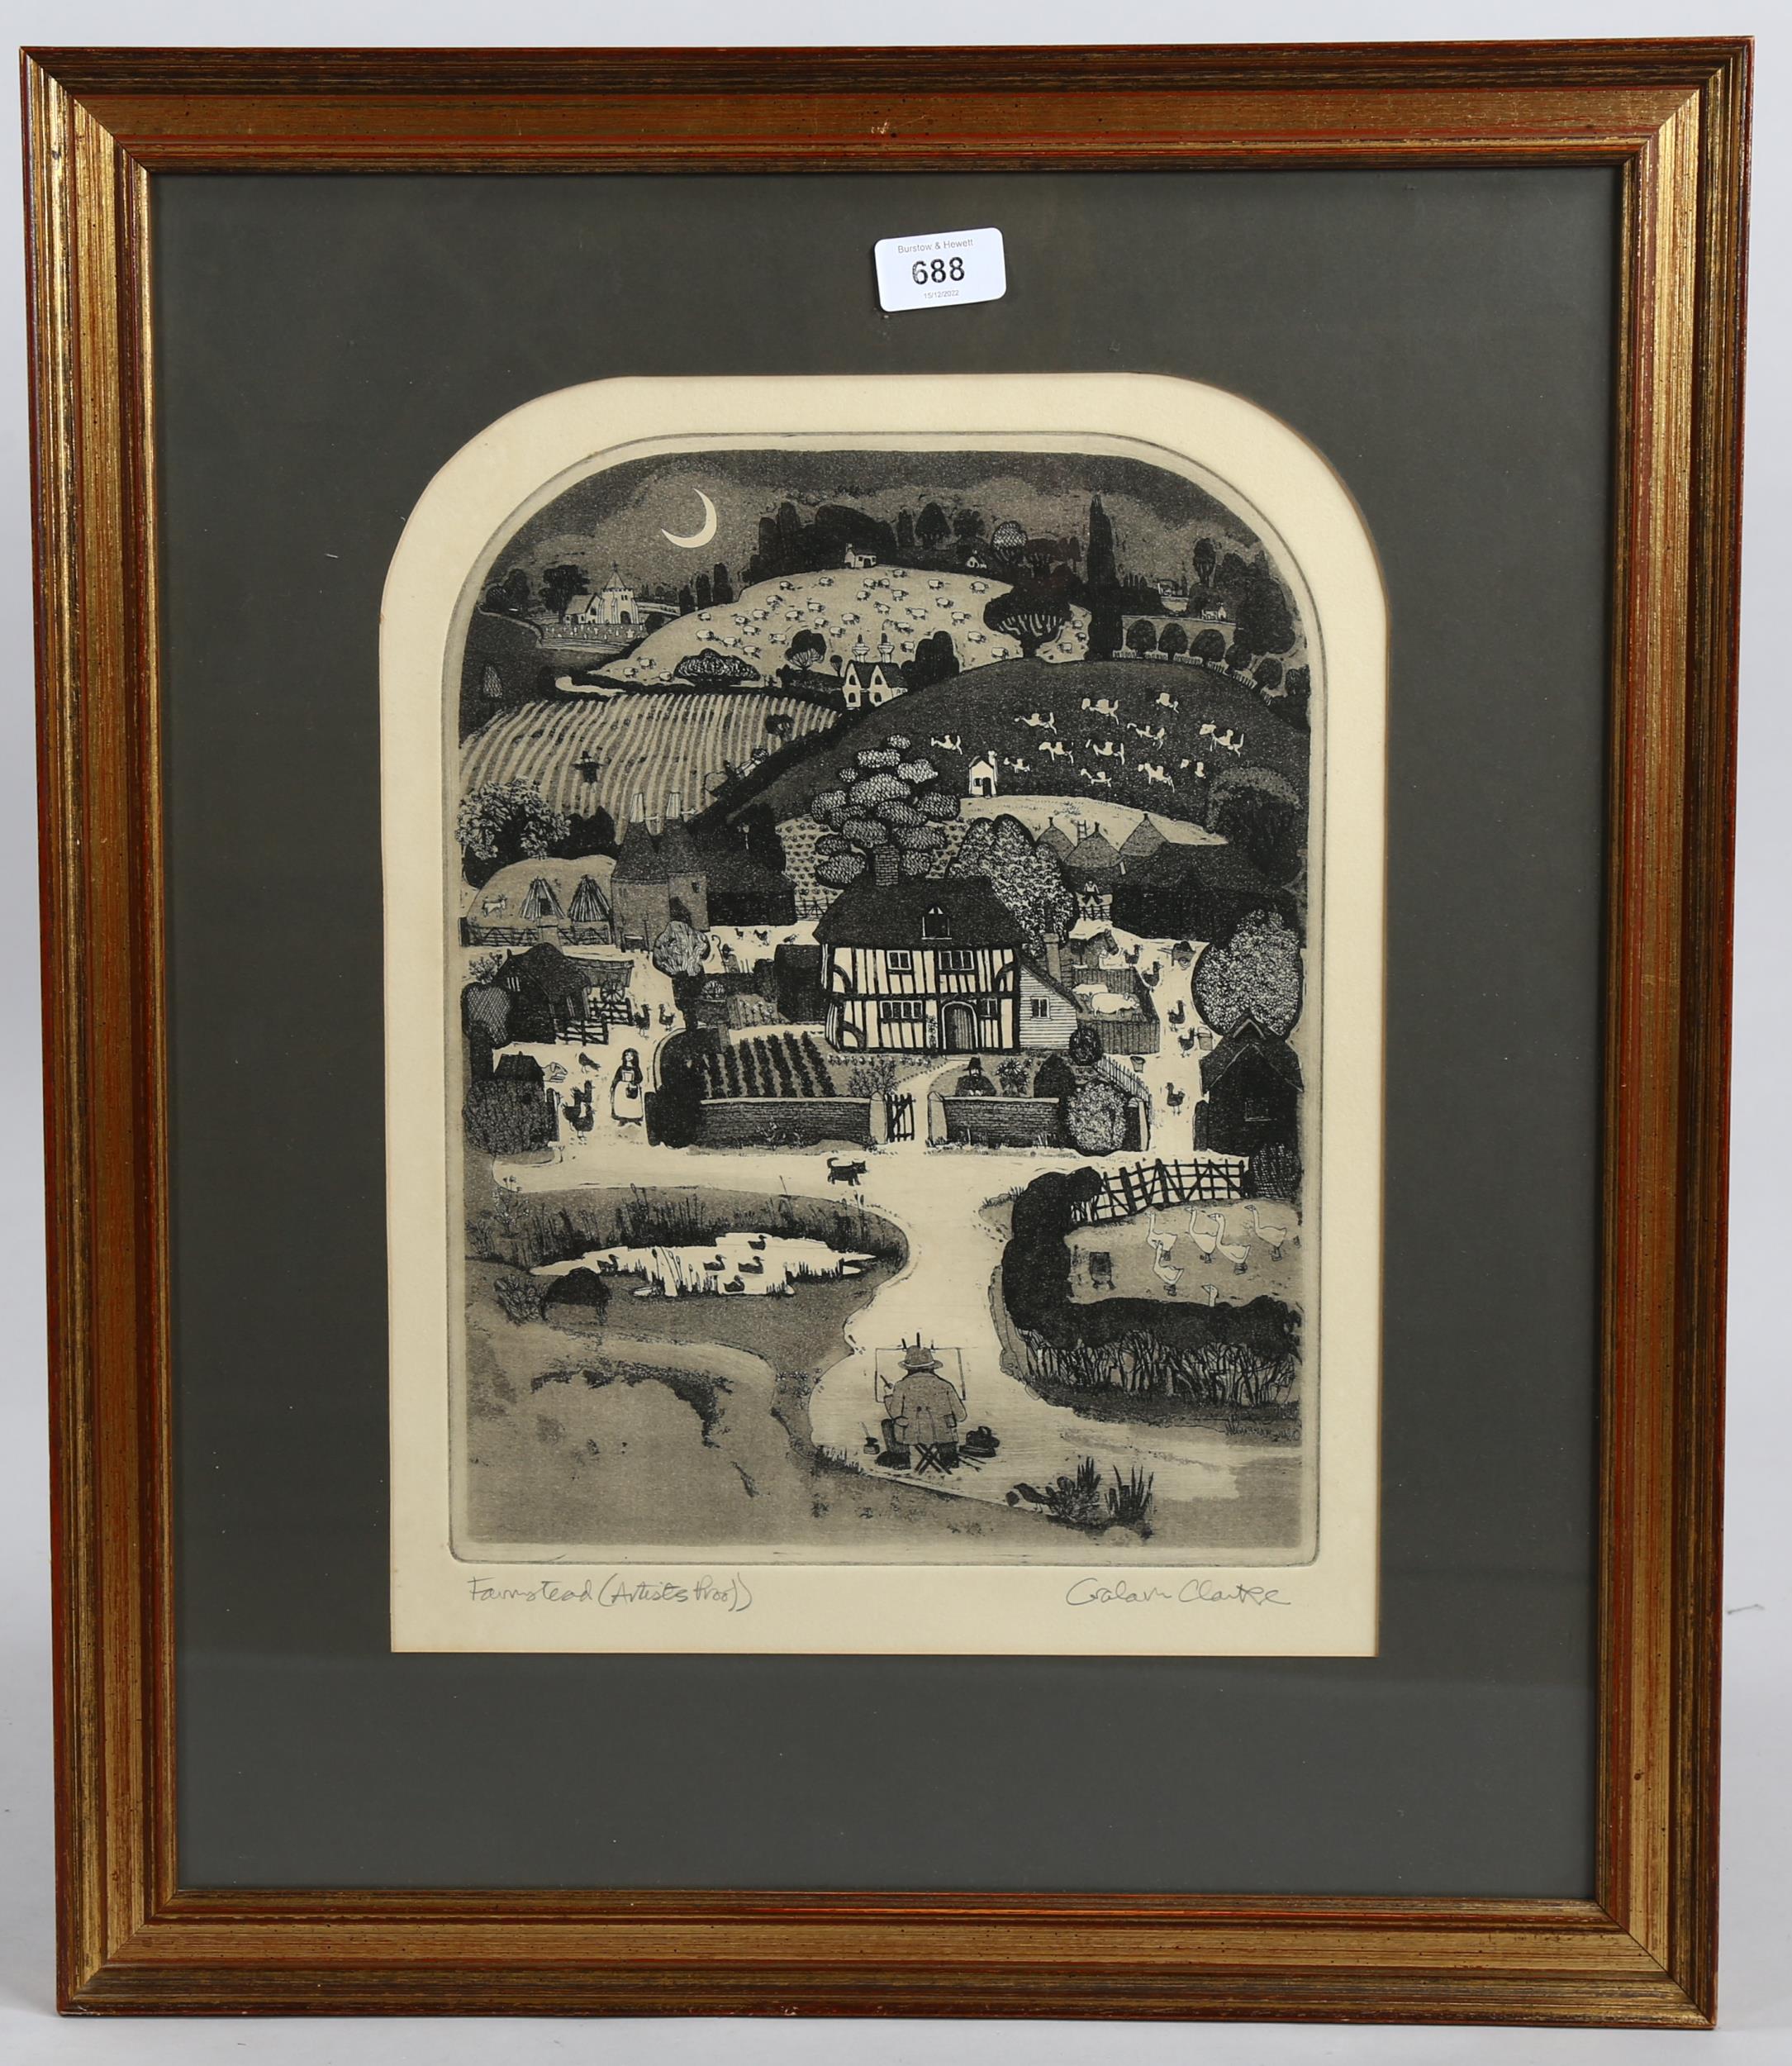 Graham Clarke, etching, Artist proof, signed in pencil, framed, 39 x 30cm good condition, slight - Image 2 of 4